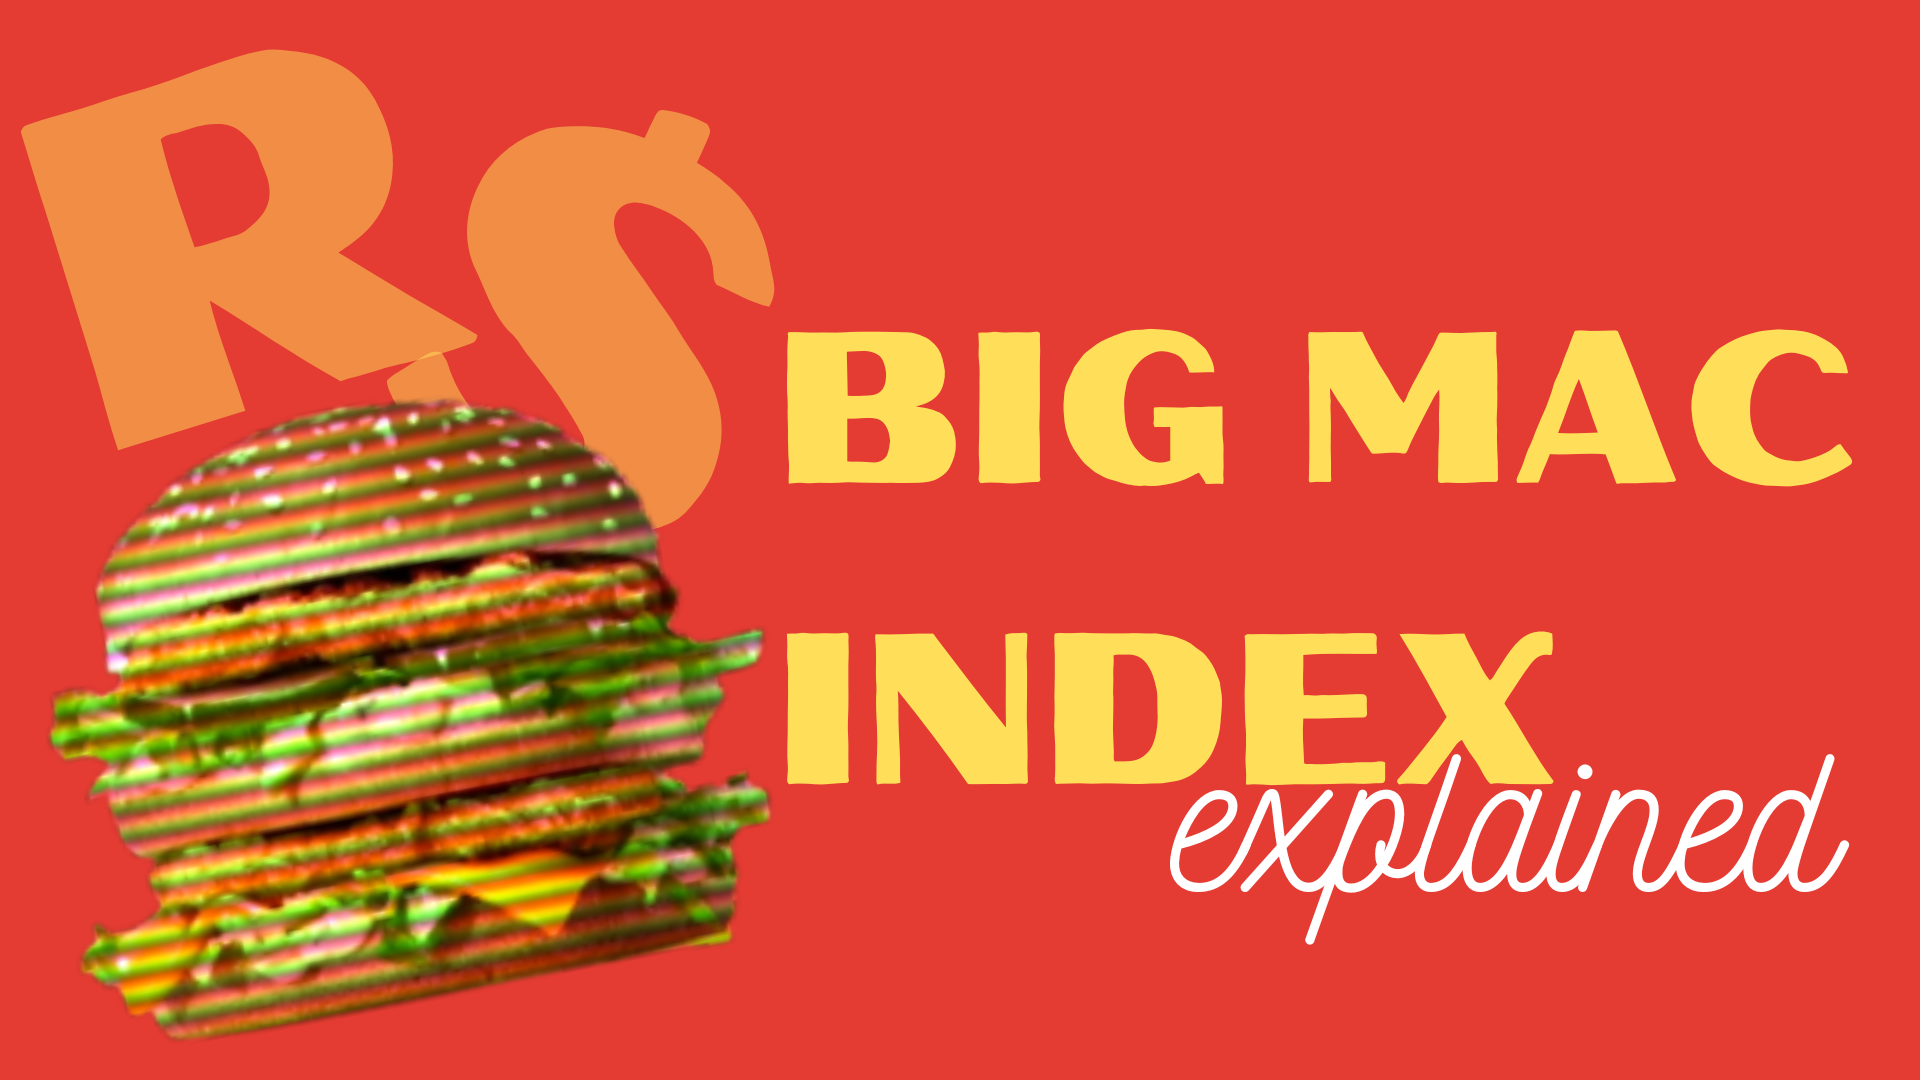 The Big Mac Index A simple tool to understanding currency value